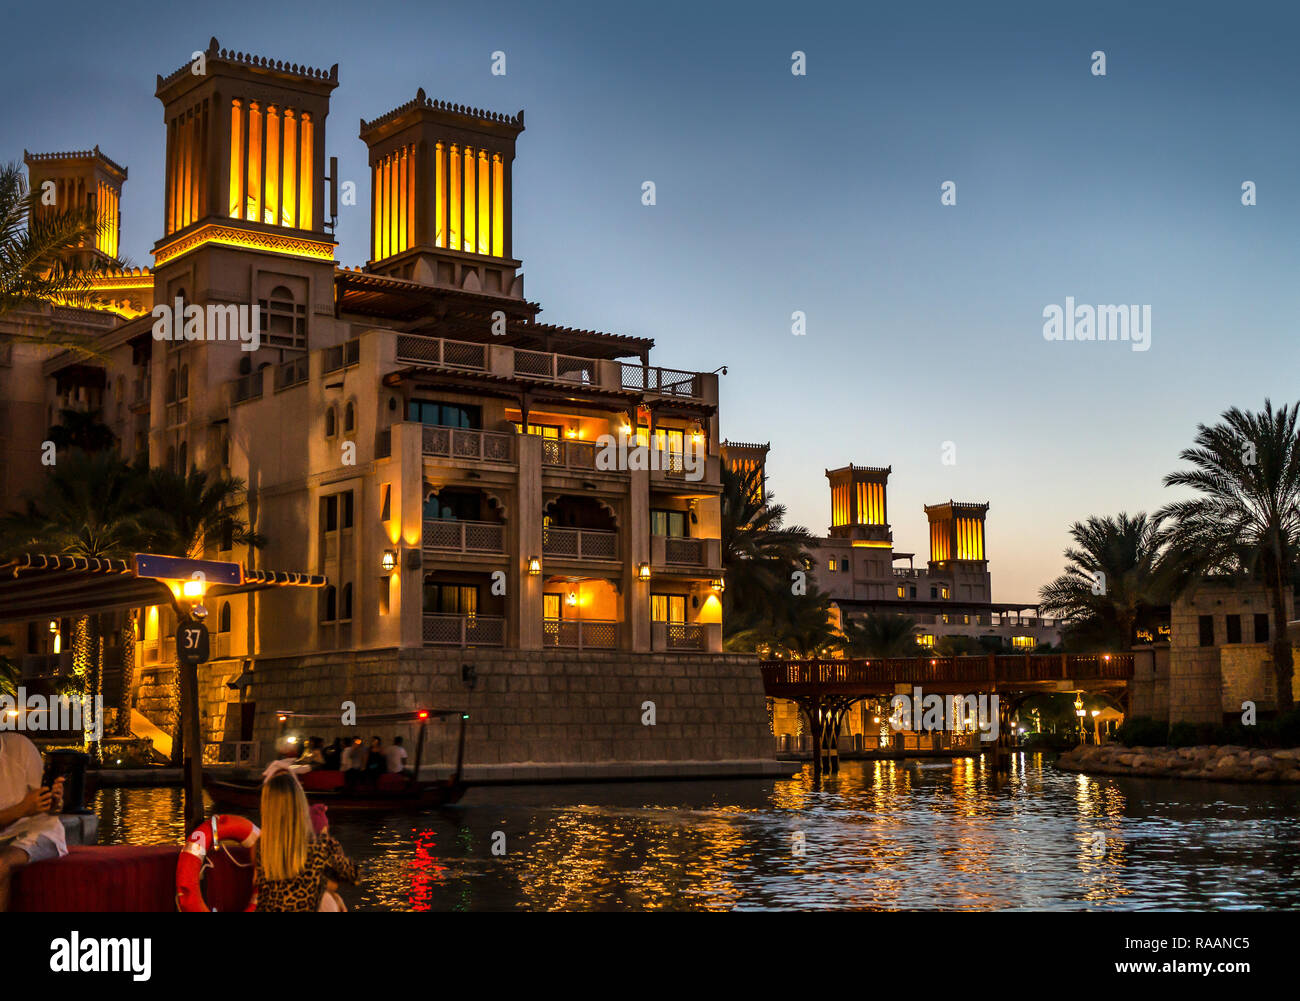 arabic architecture in Dubai souk madinat jumeirah at night with lights and reflections Stock Photo